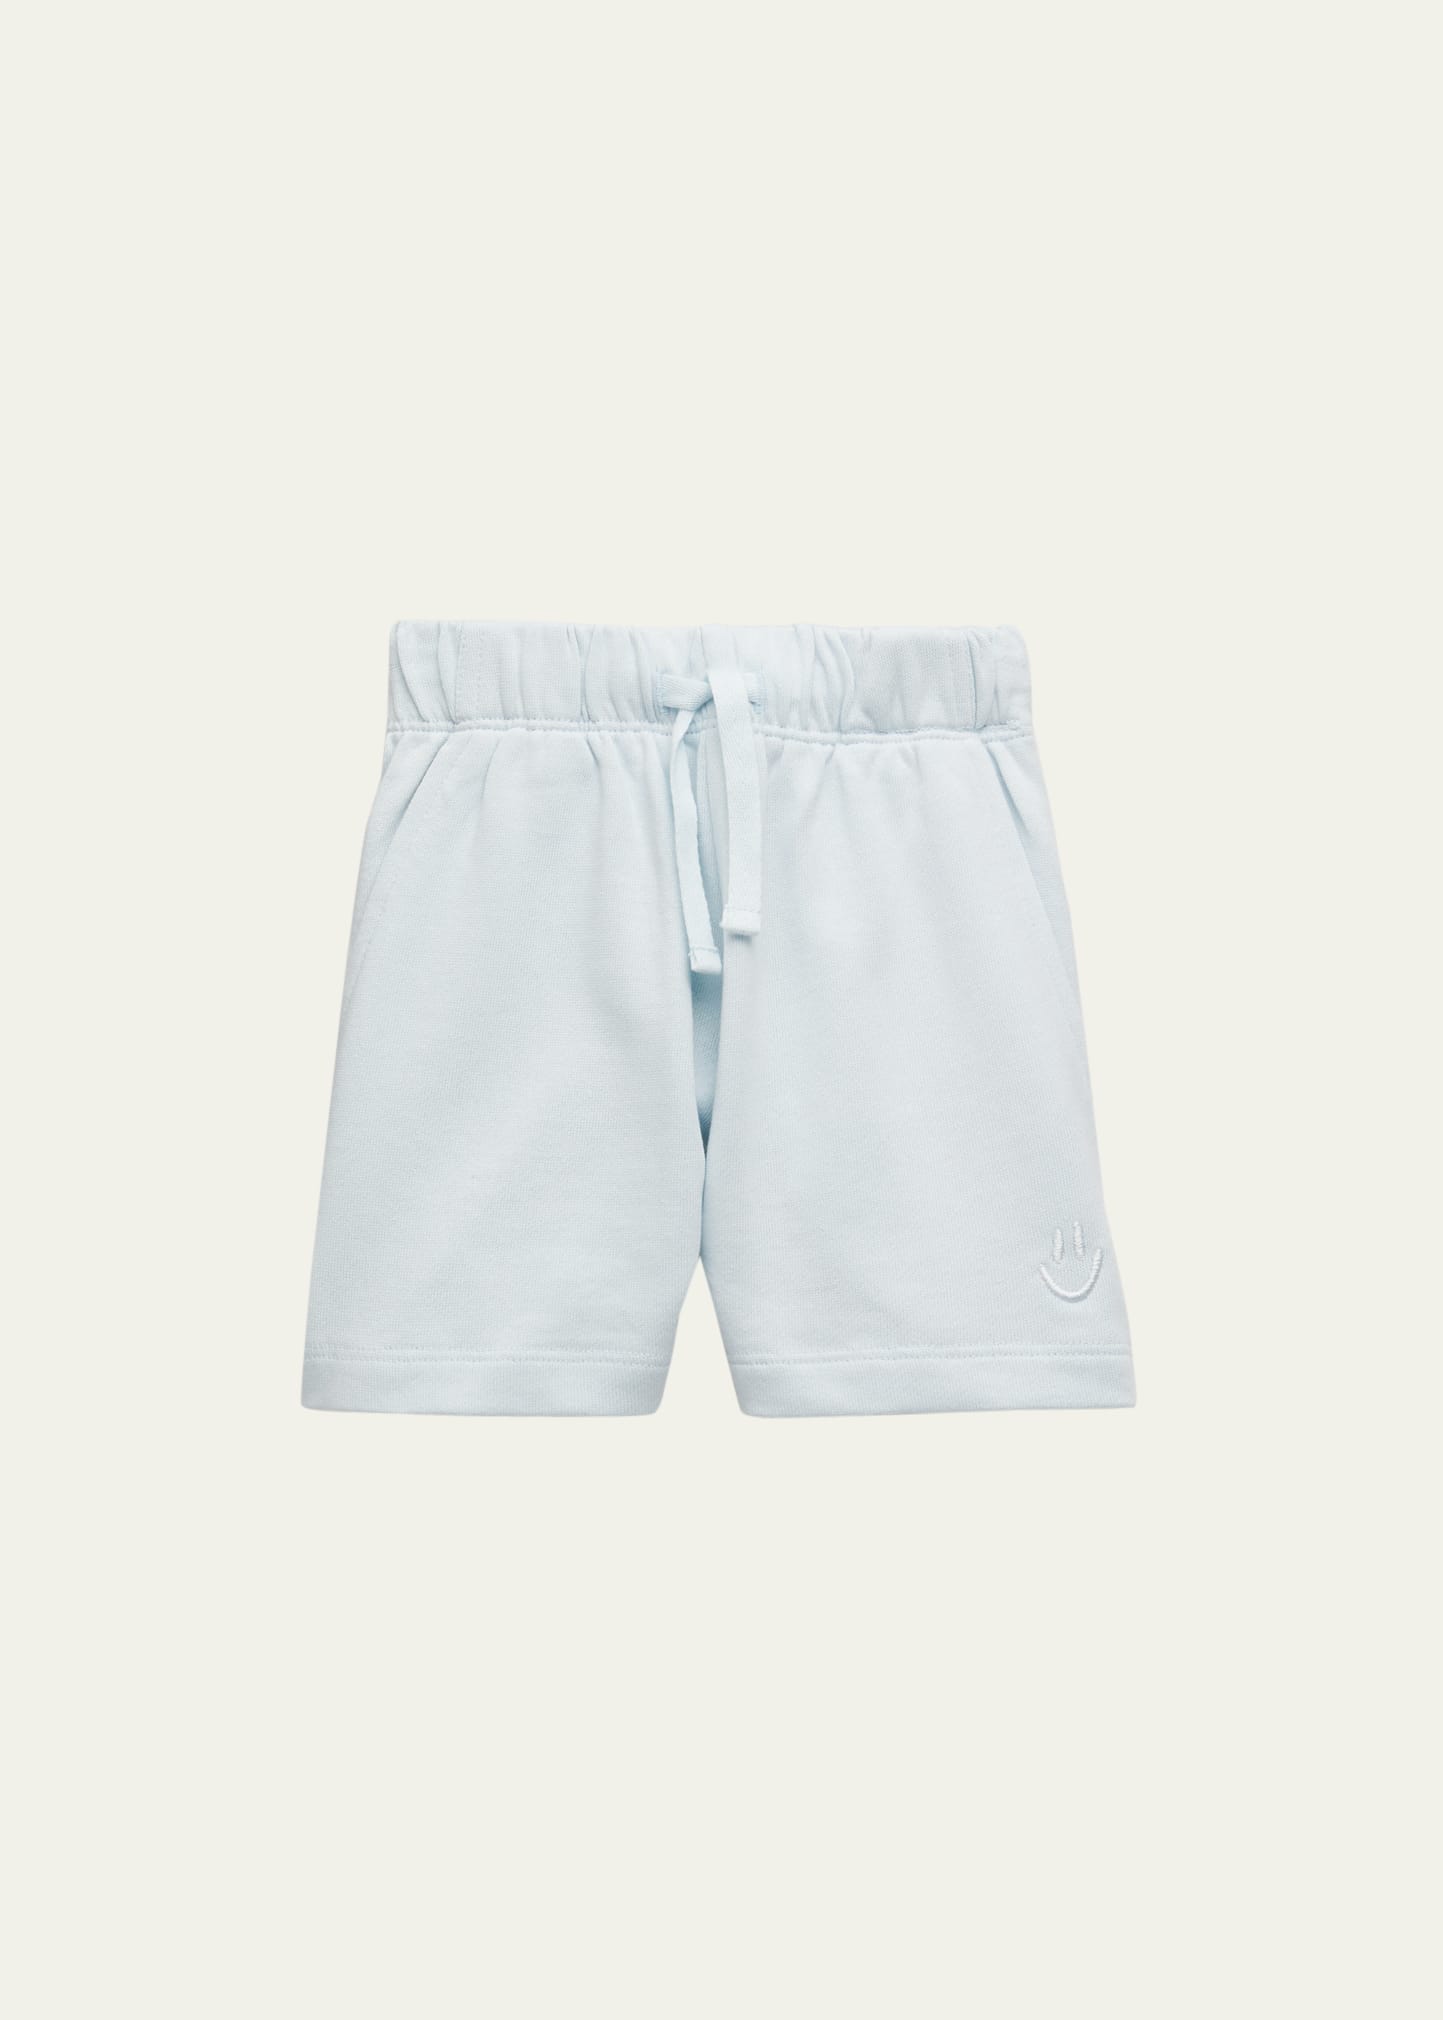 Boy's Simms Embroidered Shorts, Size 6M-24M